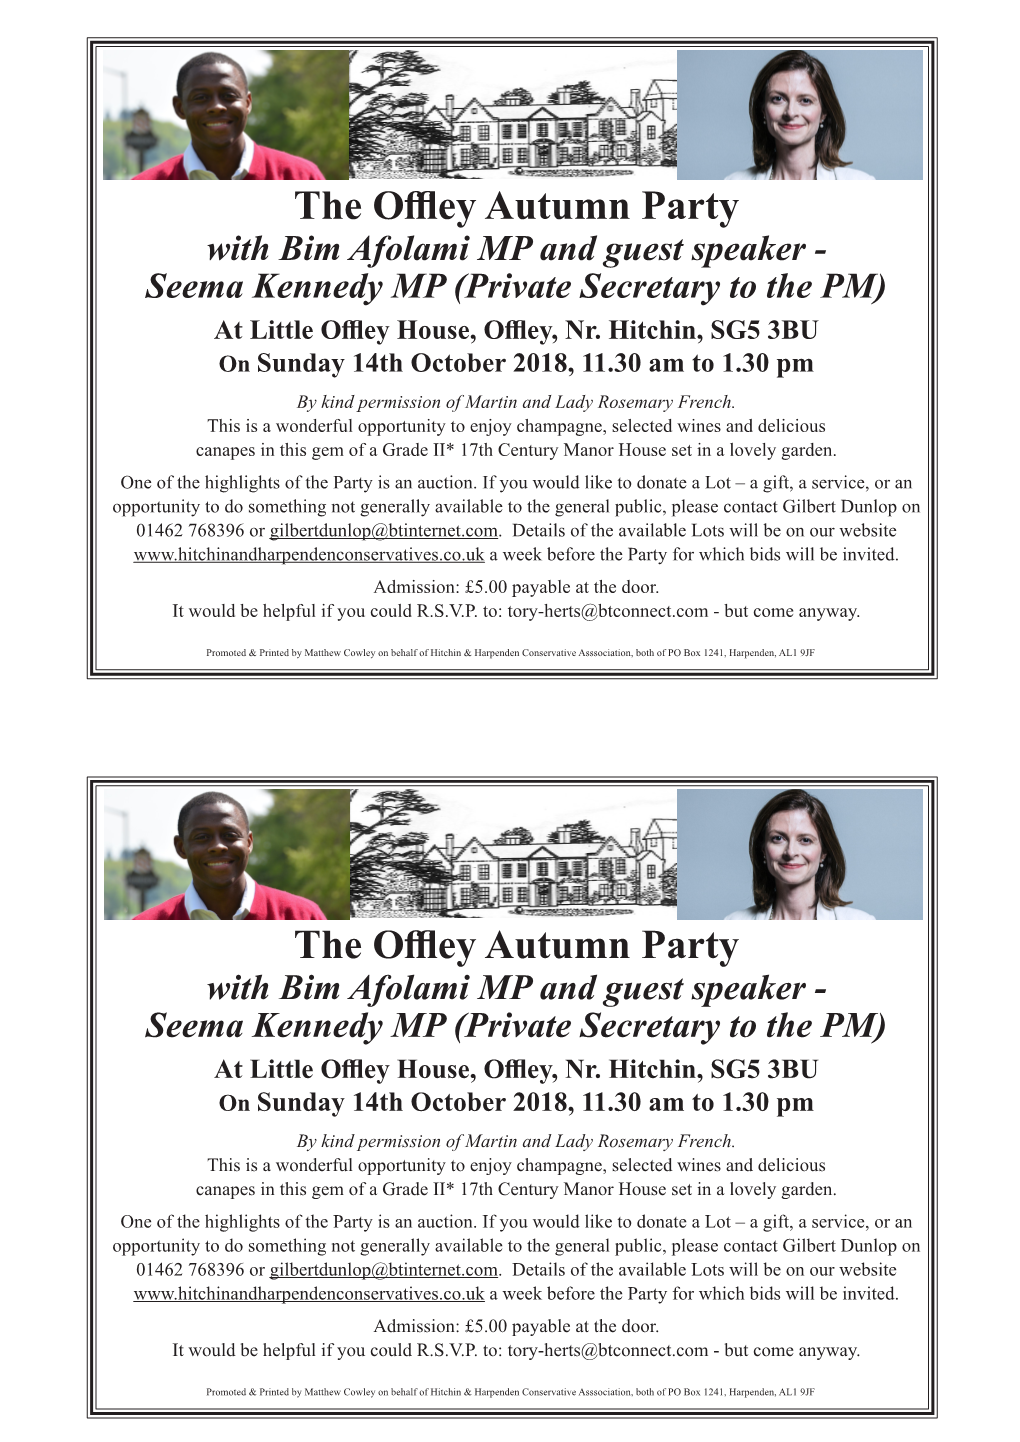 The Offley Autumn Party with Bim Afolami MP and Guest Speaker - Seema Kennedy MP (Private Secretary to the PM) at Little Offley House, Offley, Nr